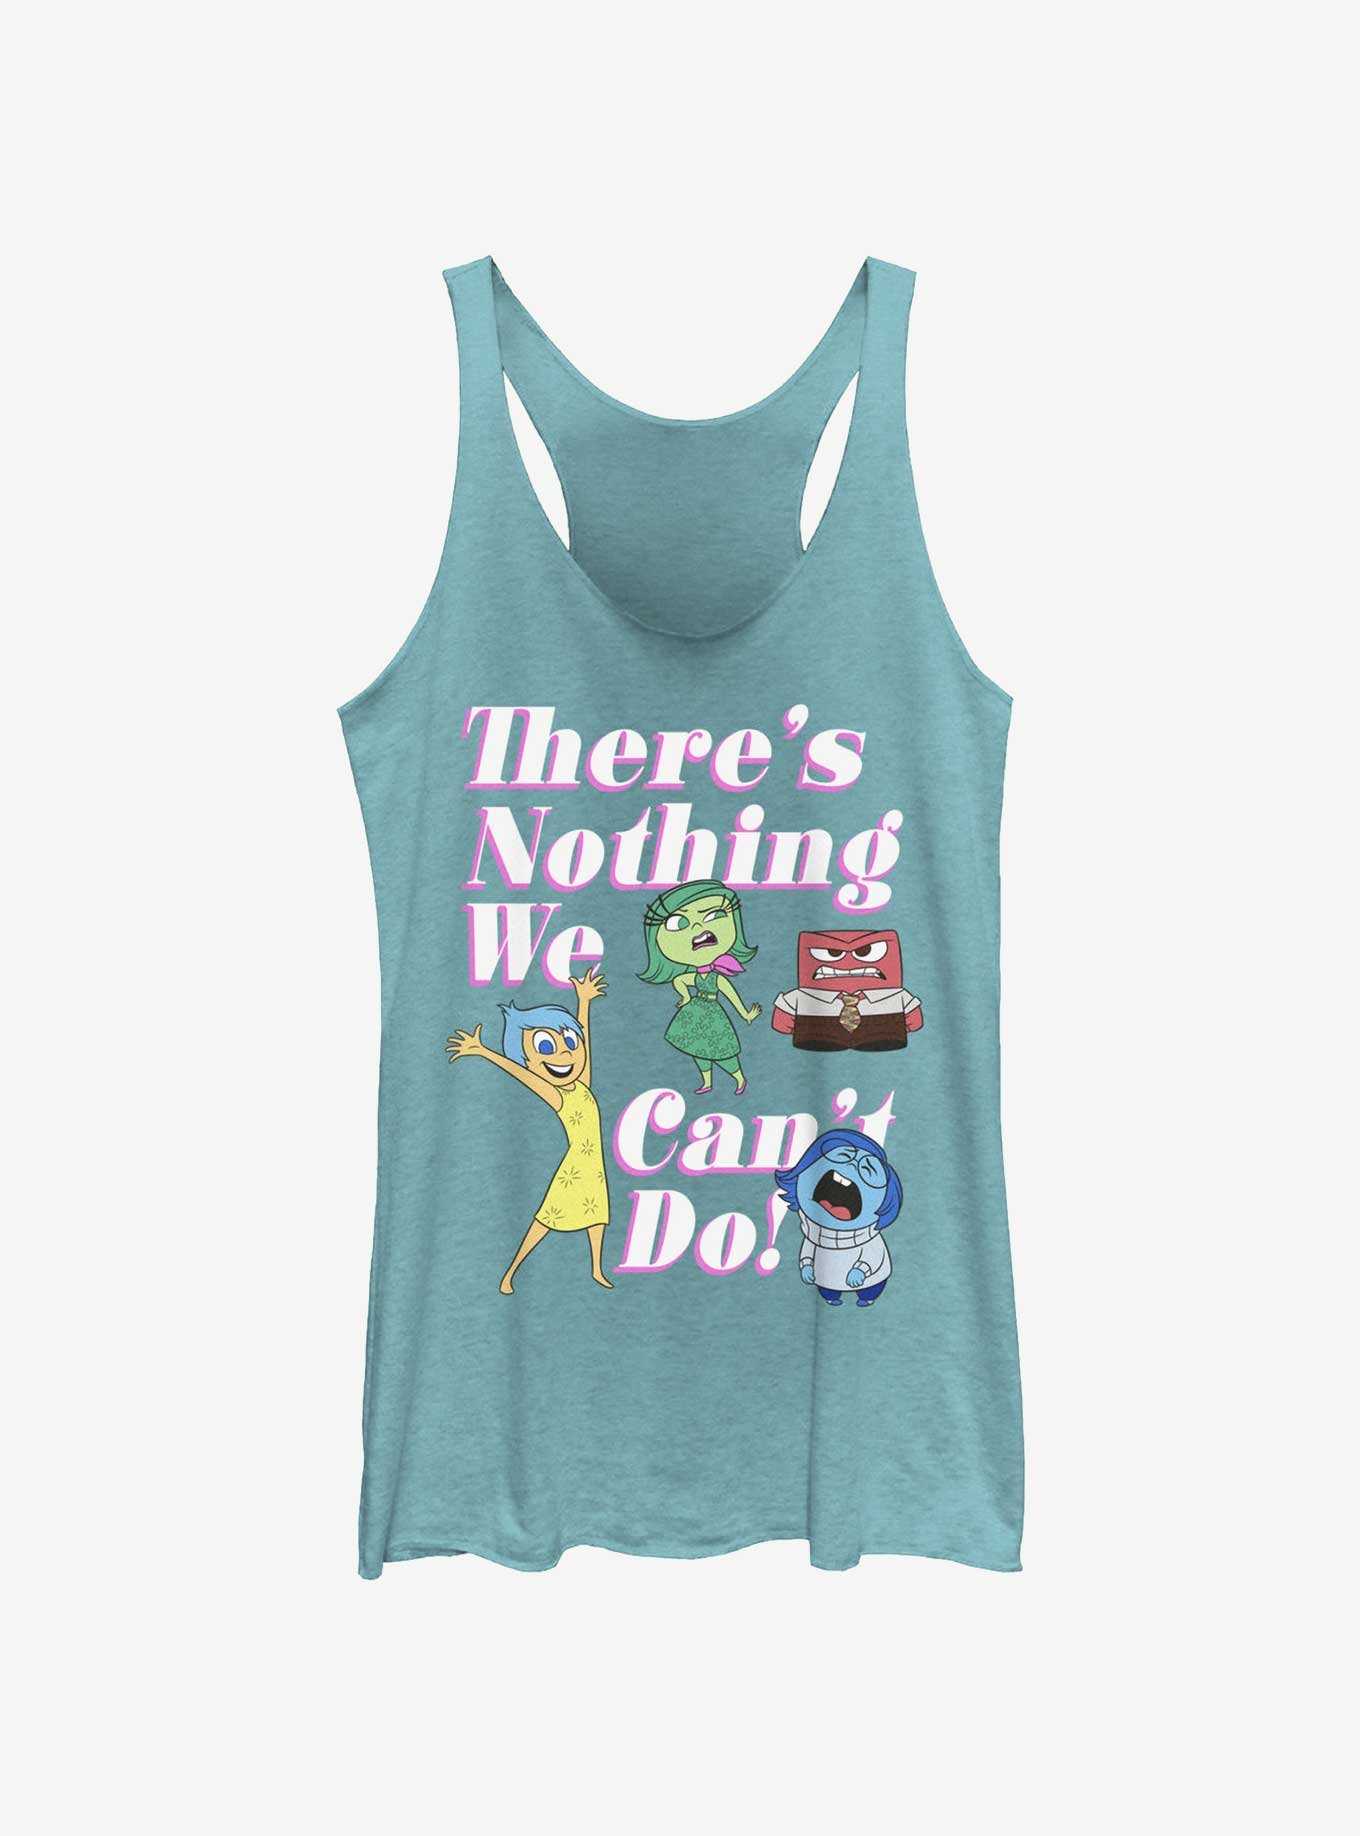 Disney Pixar Inside Out 2 There's Nothing We Can't Do Womens Tank Top, , hi-res